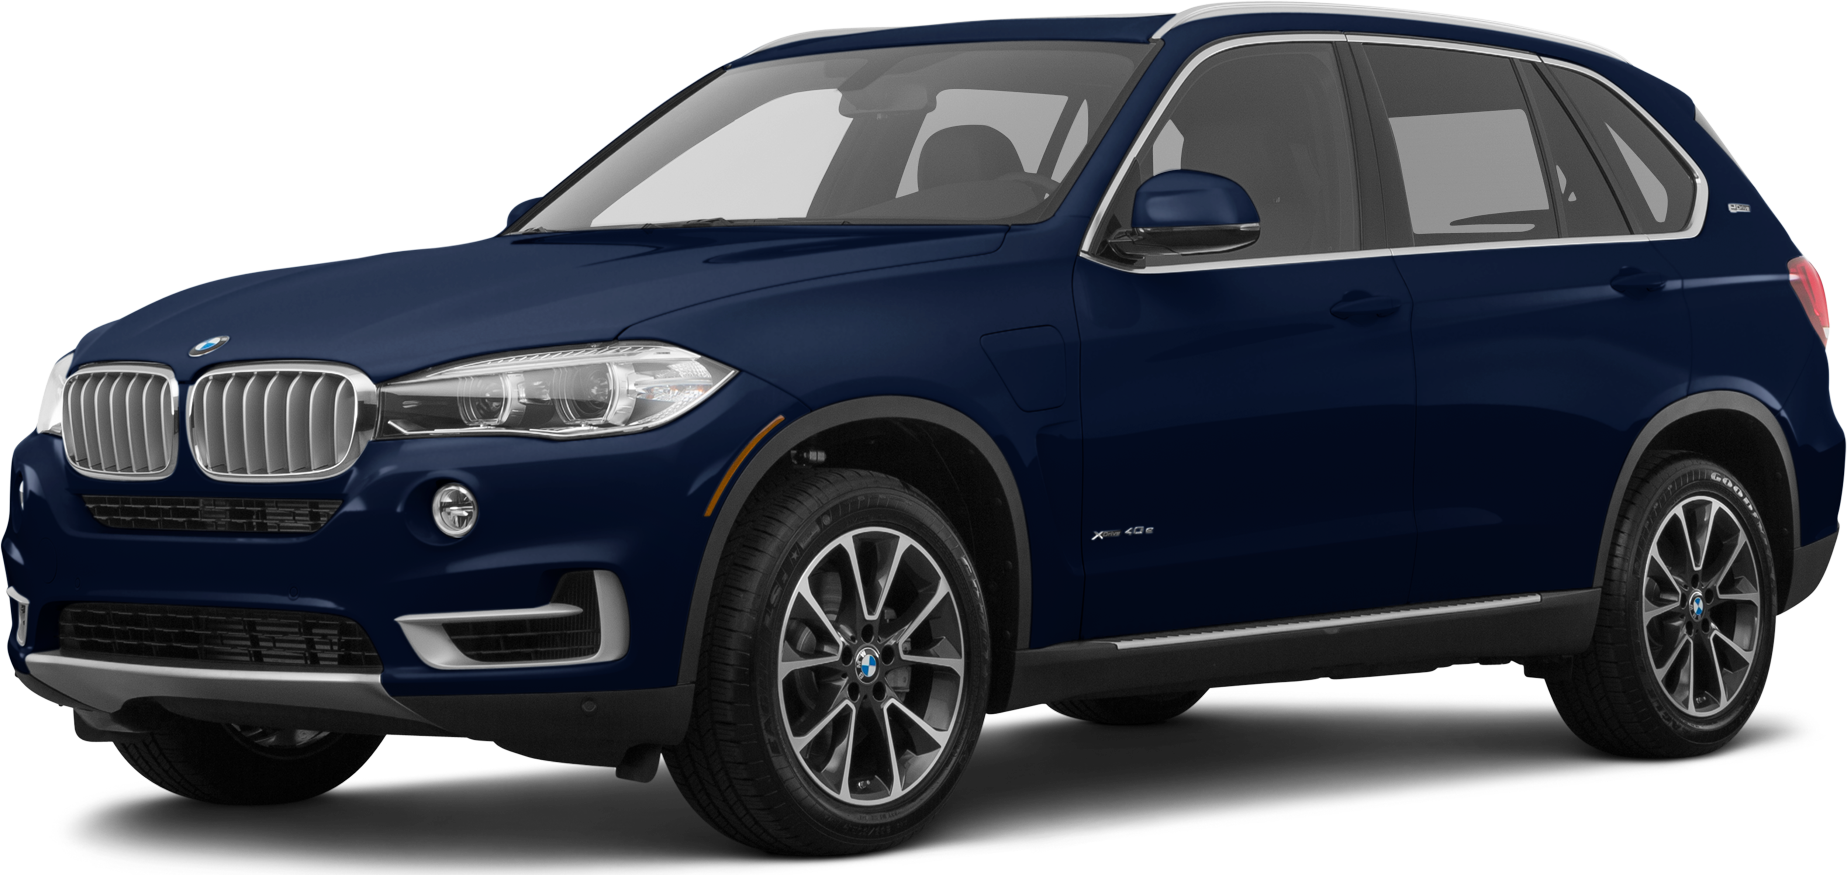 2017 BMW X5 Price, Value, Ratings & Reviews